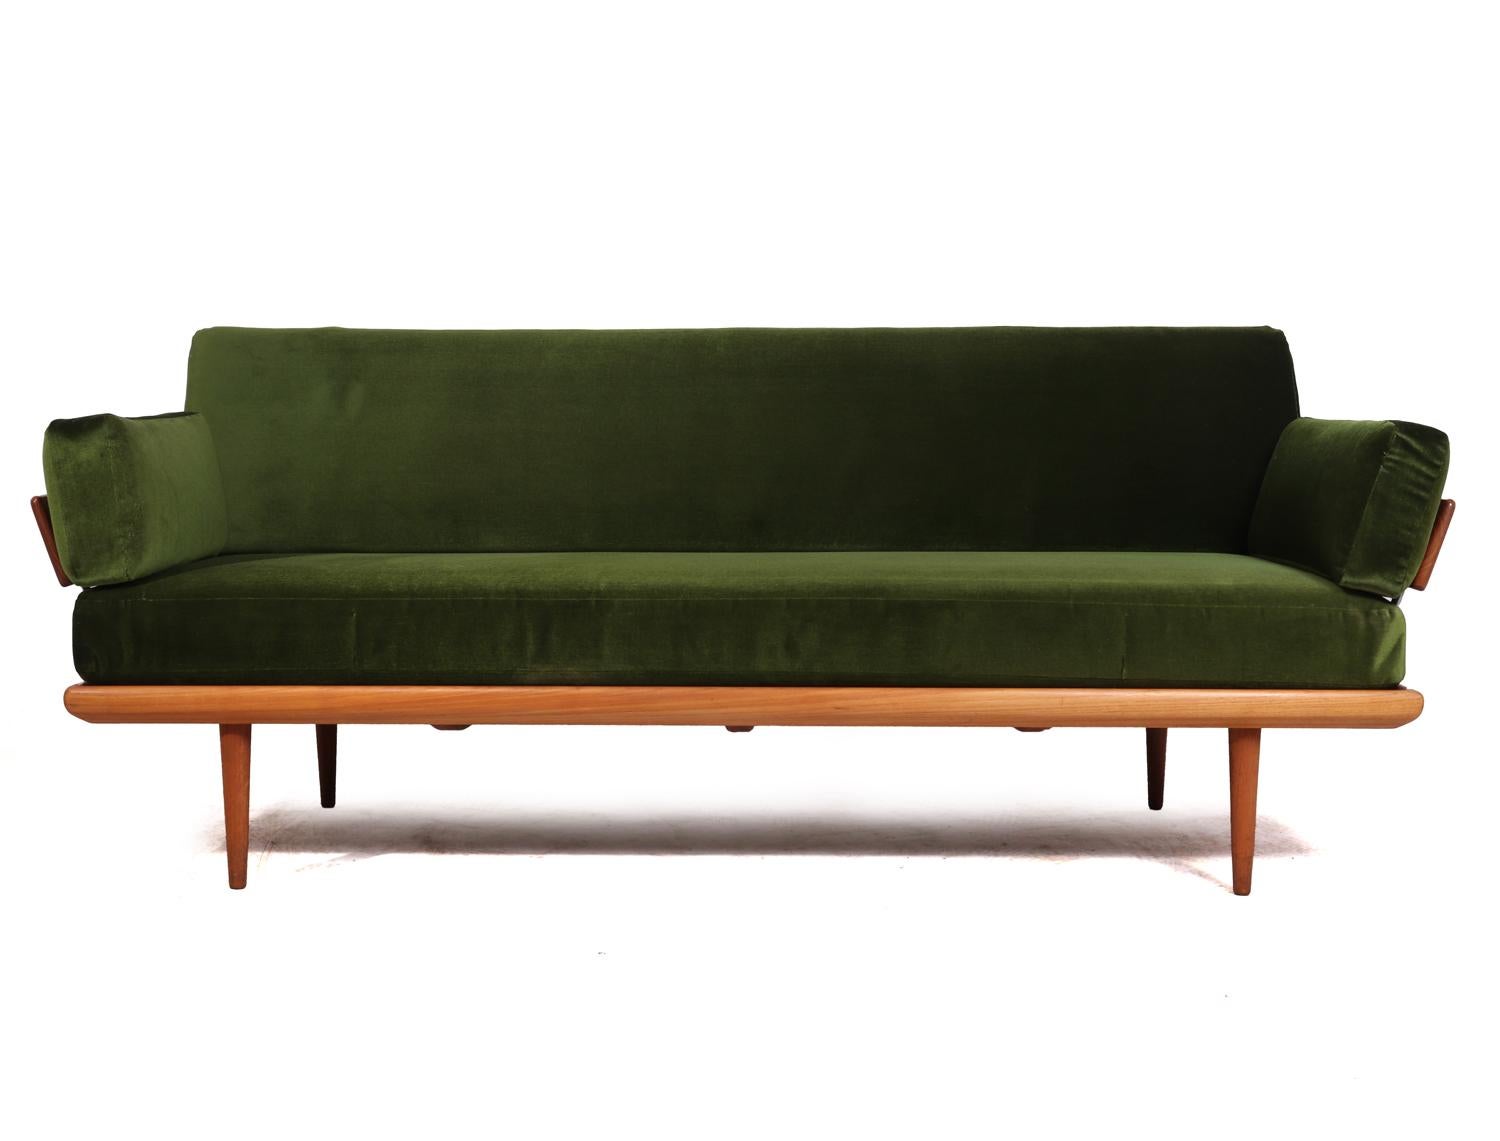 Teak minerva daybed by Peter Hvidt for France and Son
Designed by Peter Hvidt and Orla Molgaard in 1957 and produced in Denmark by France and Son in teak and chromed steel the seat back and arms are the original sprung cushions re upholstered to a